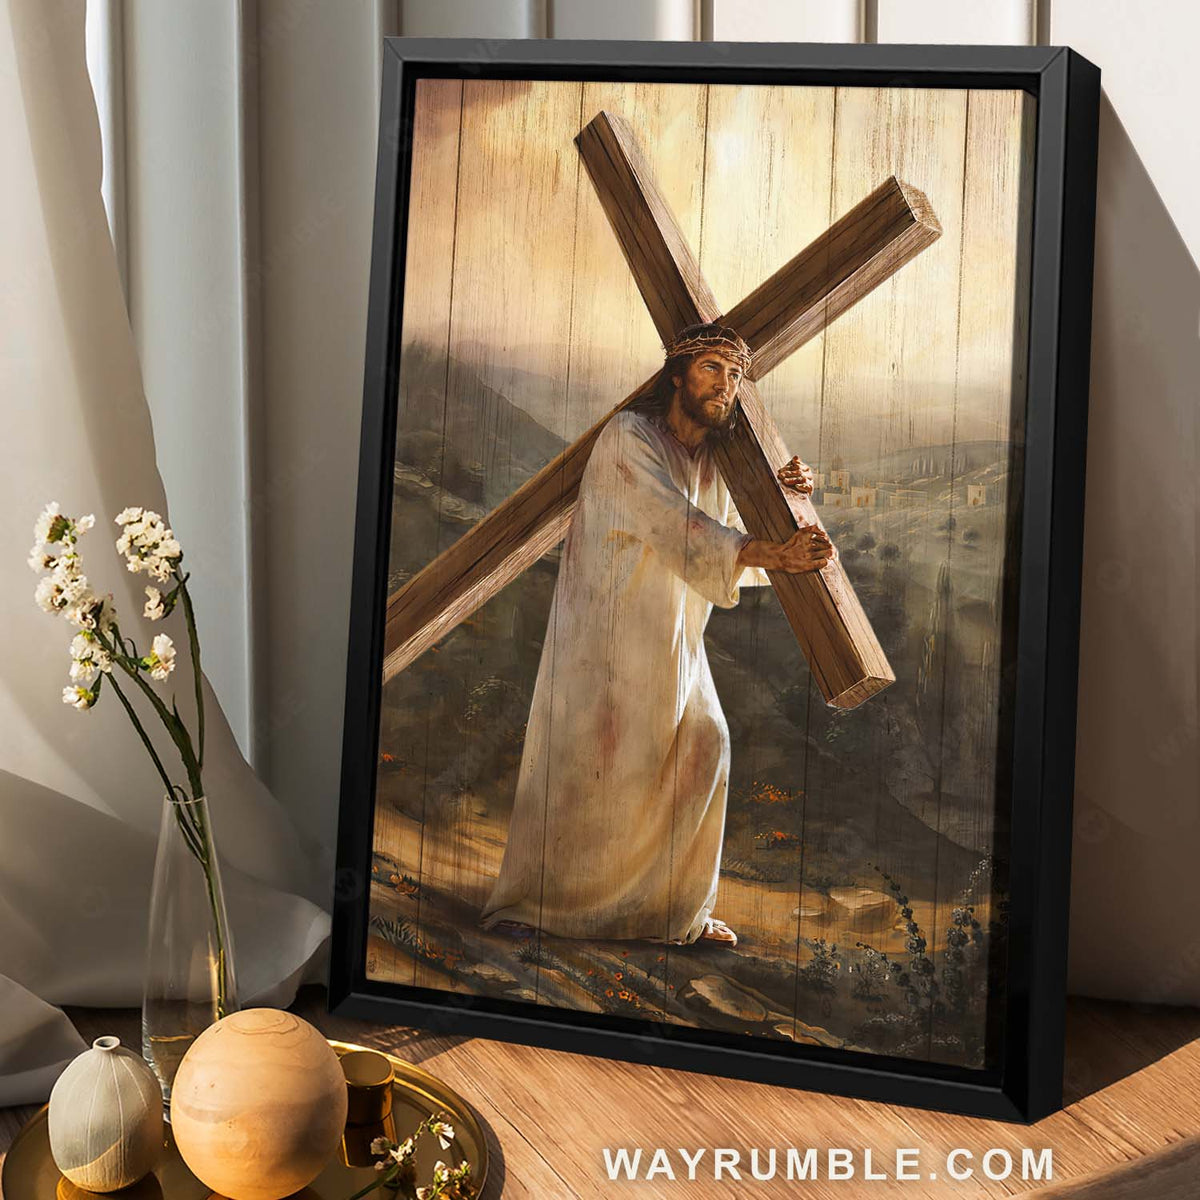 jesus carrying the cross images